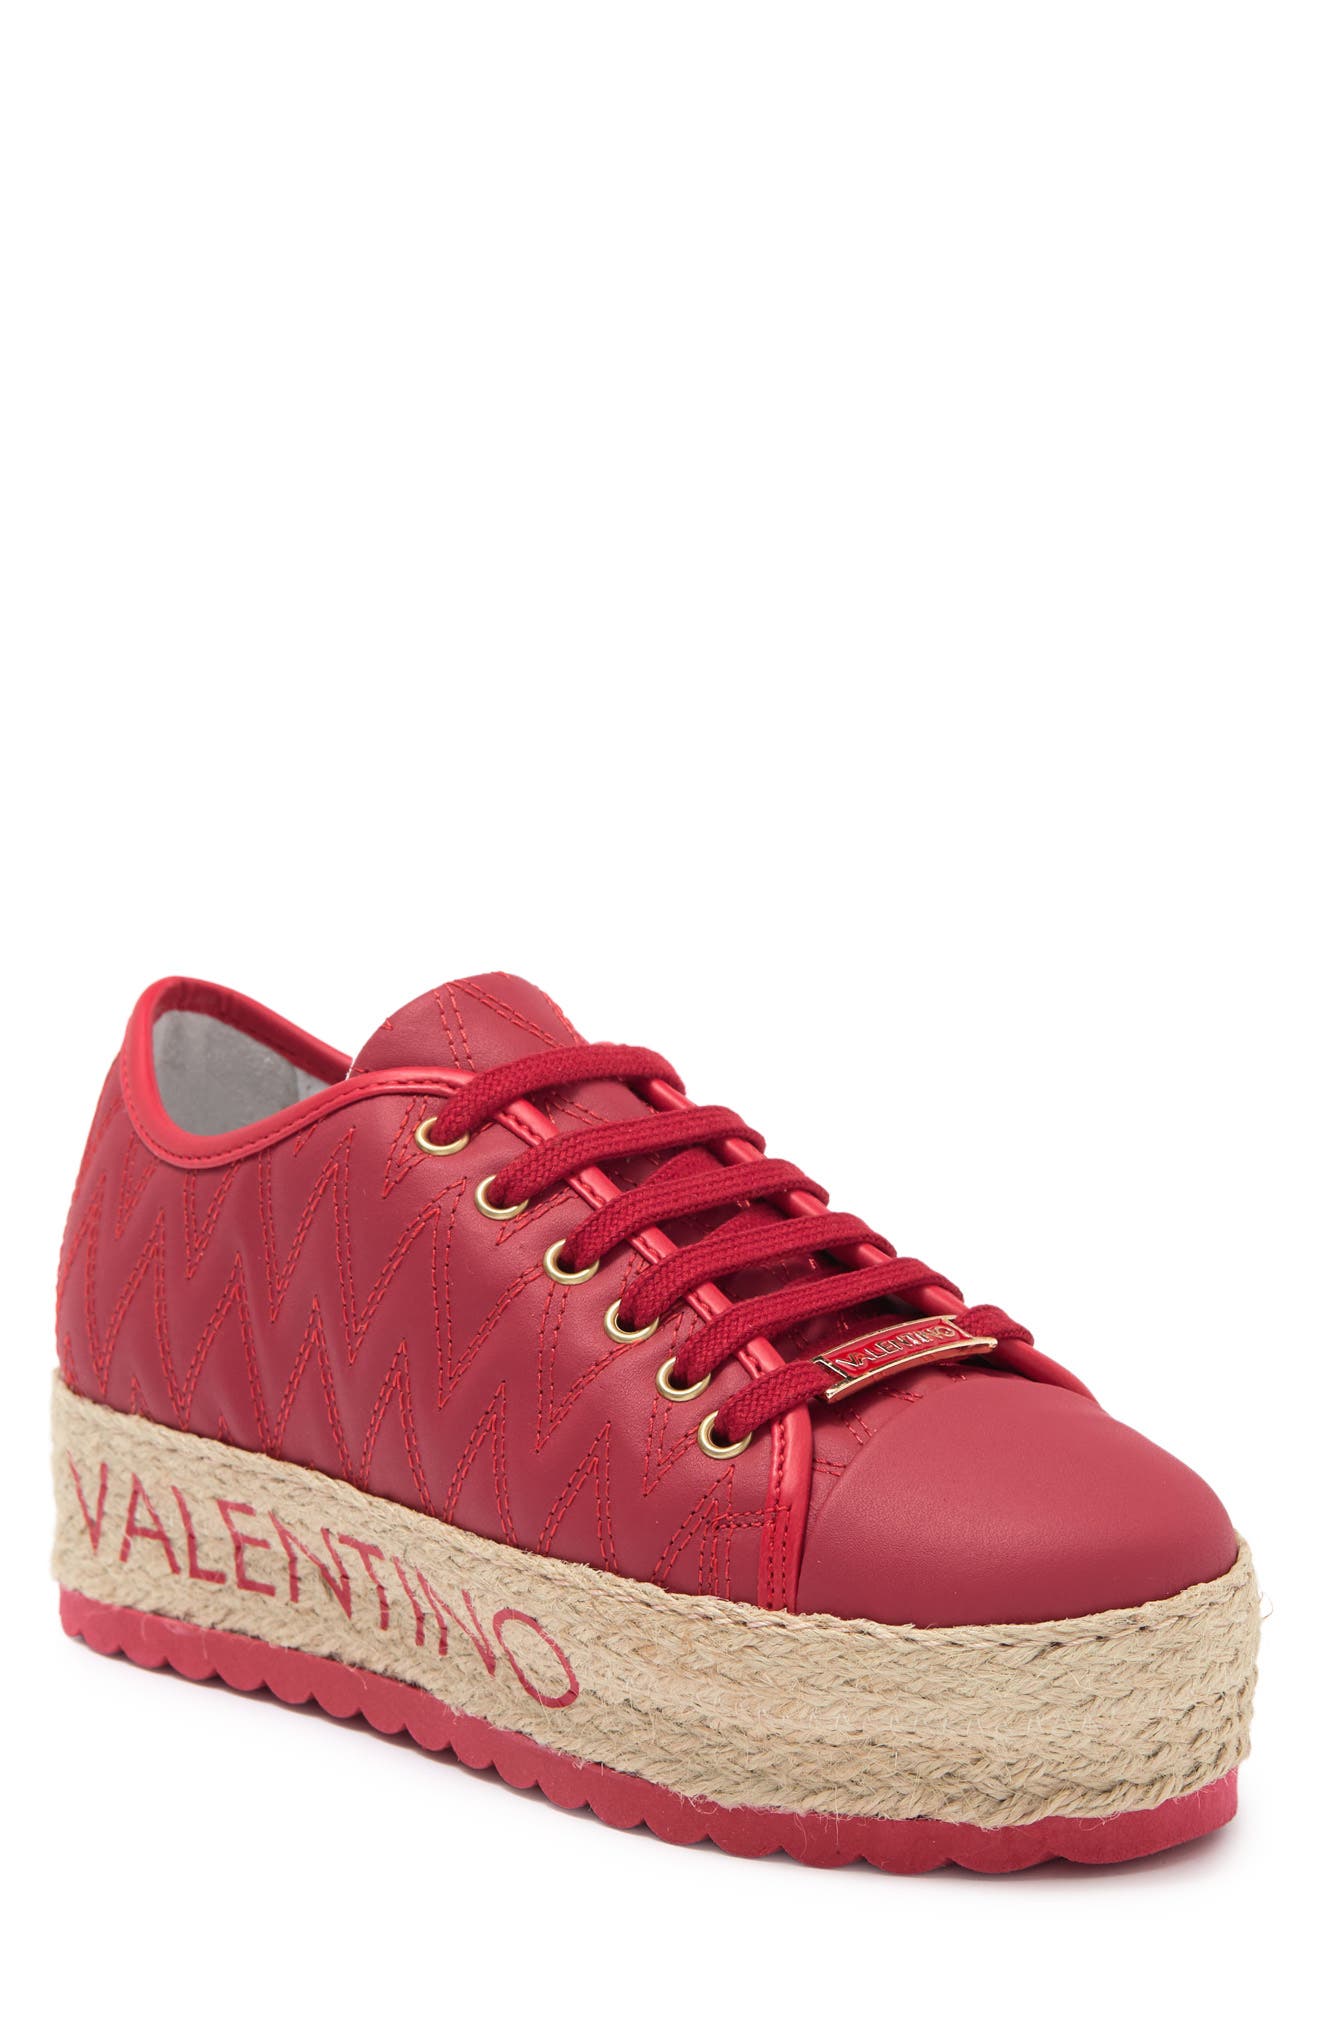 all red platform sneakers